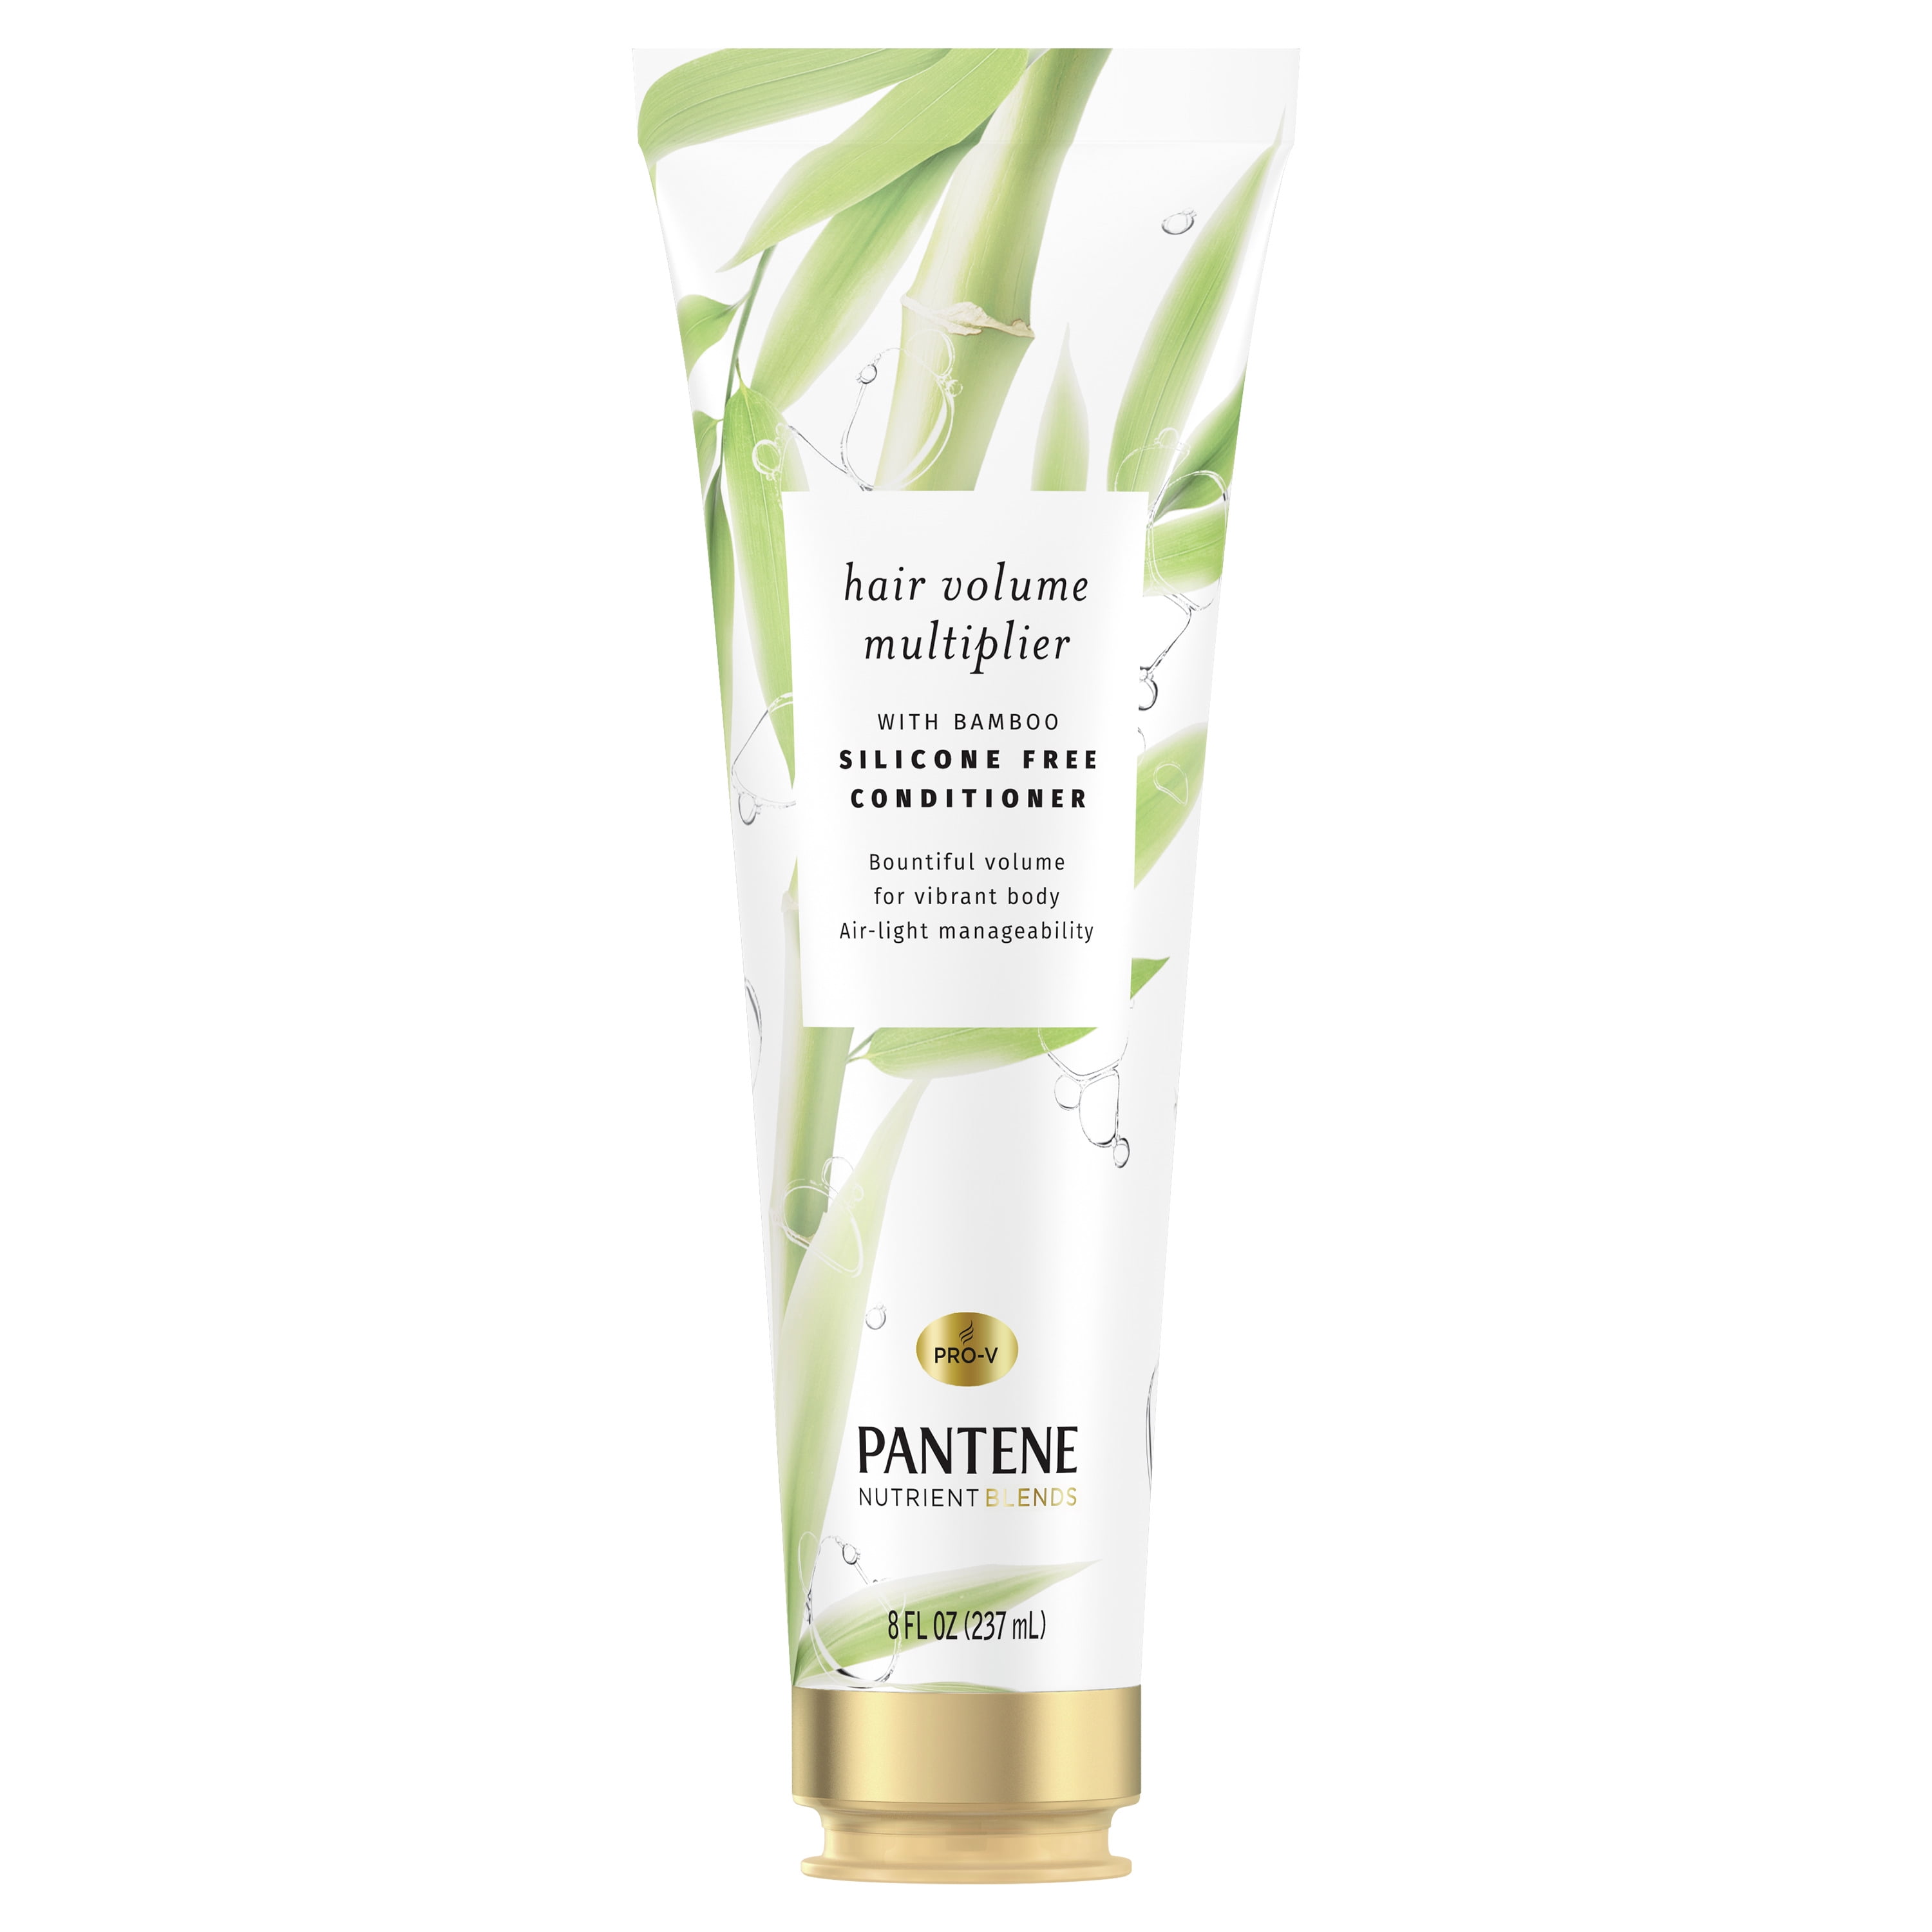 Pantene Nutrient Blends Hair Volume Multiplier Silicone Free Bamboo Conditioner for Fine, Thin Hair, 8.0 Fl Oz